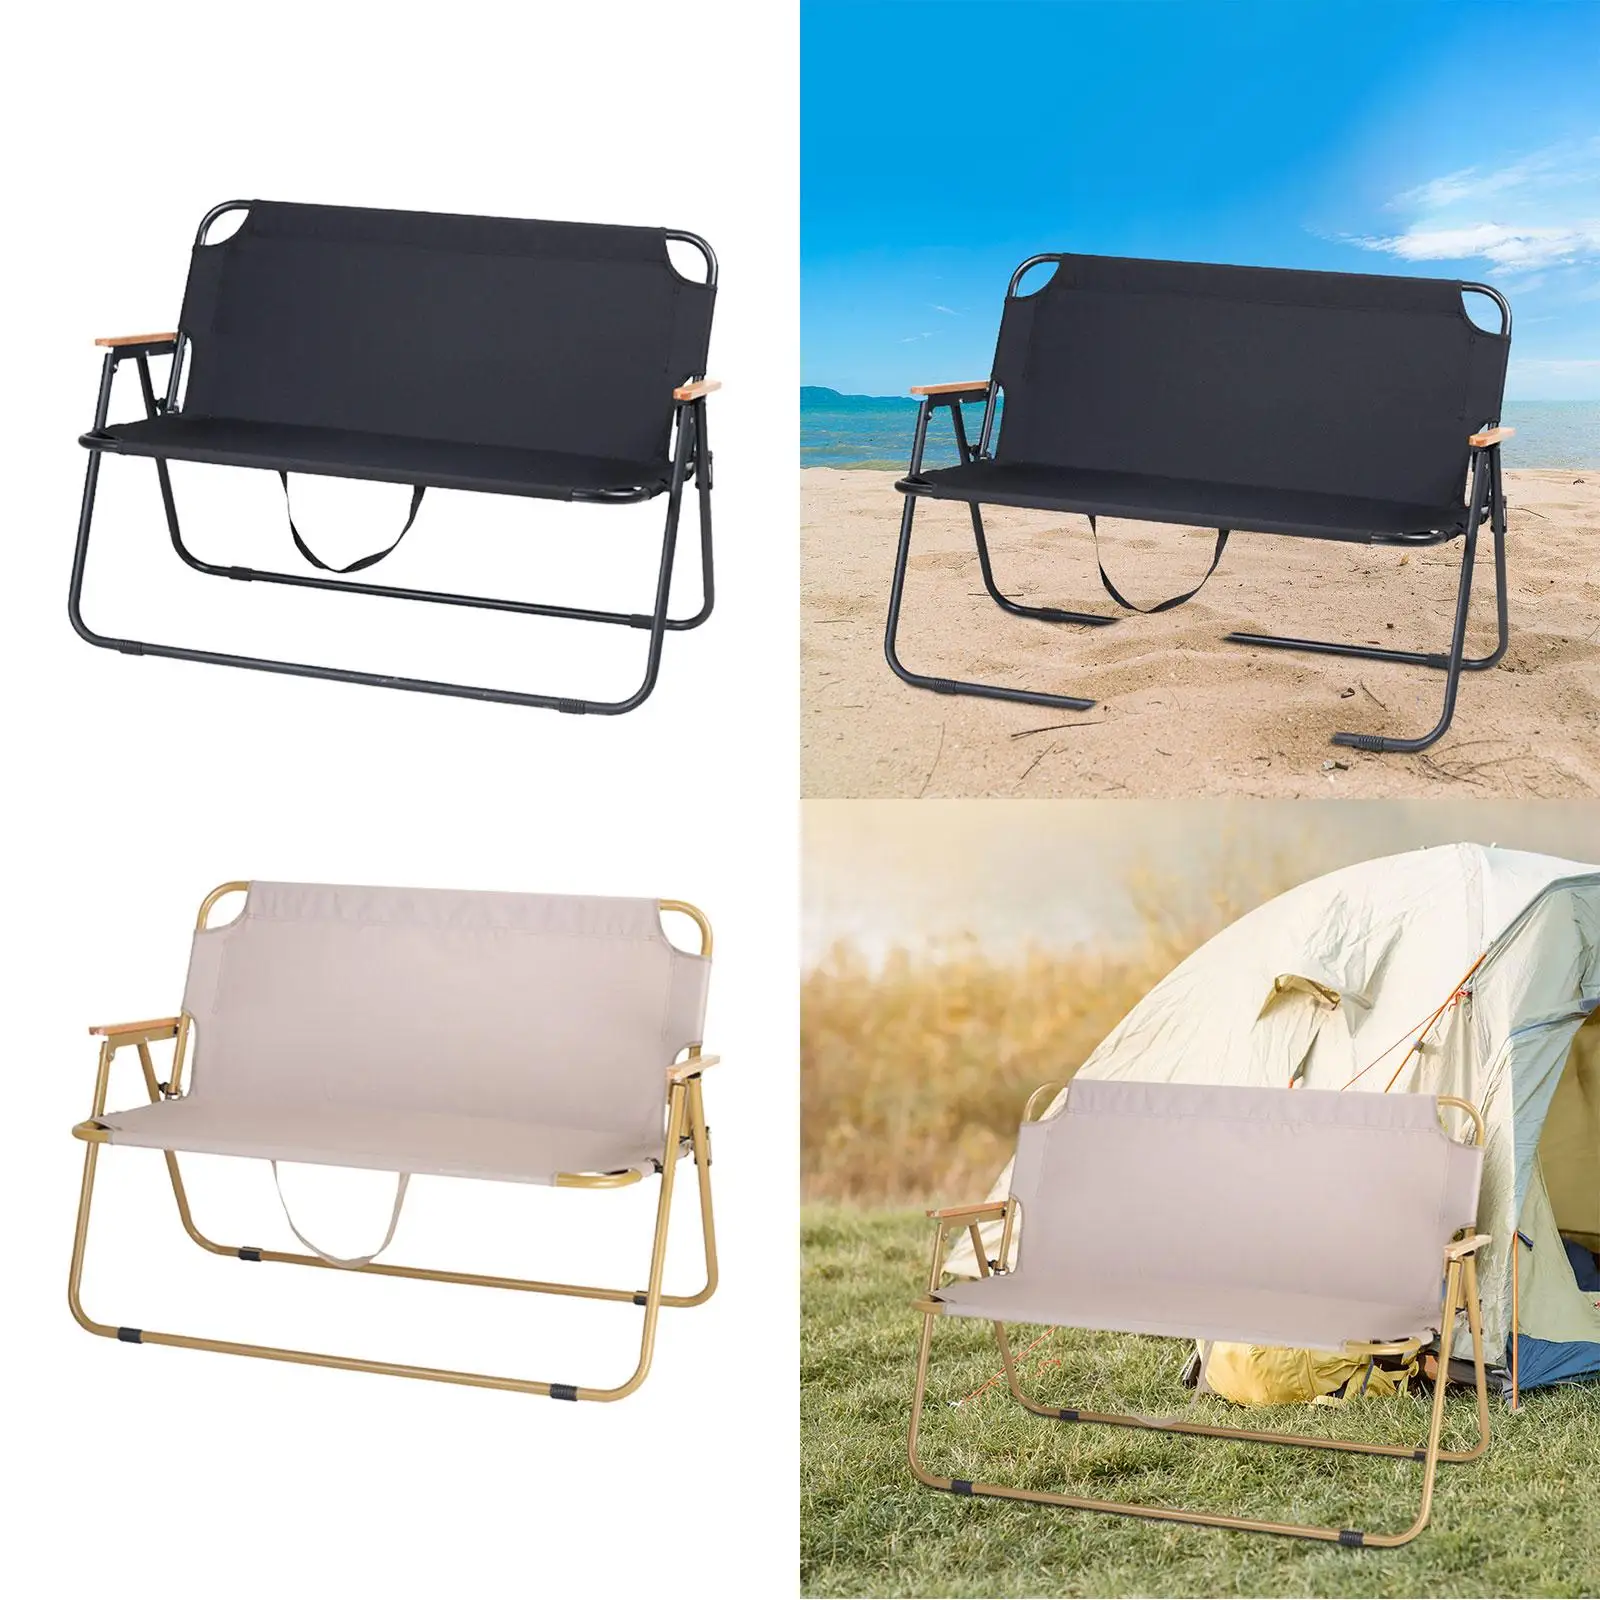 Folding Camping Chair Outdoor Hiking Travel Camping Seat Lightweight Fishing Backpacking Double Chair Patio Beach Chair Armchair